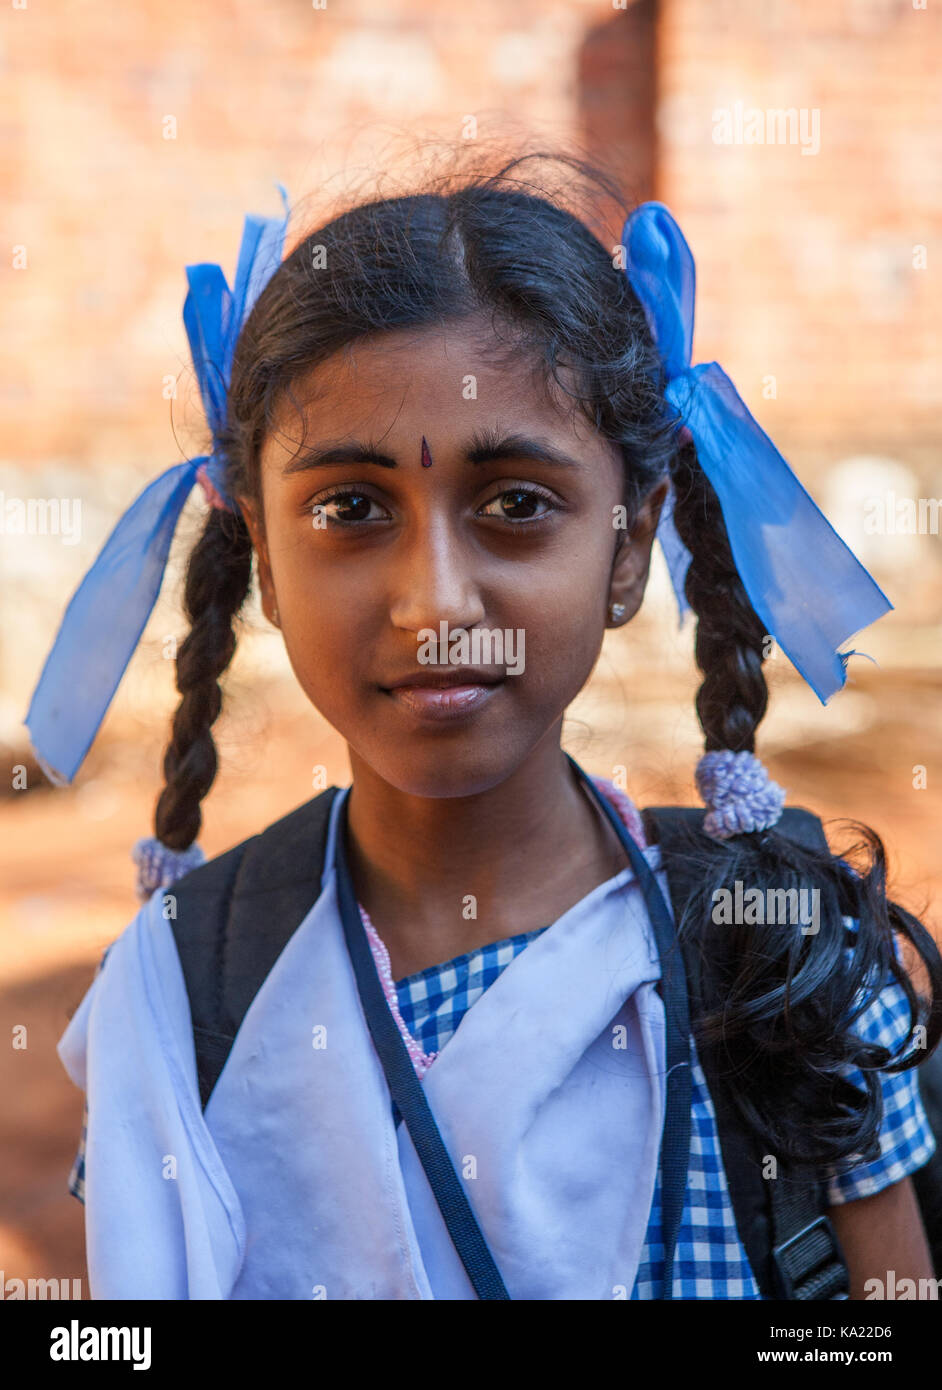 Rural residents in daily life. Little girl in school uniform. The girl had  a traditional Tikka on the forehead and children eye makeup and lips Stock  Photo - Alamy